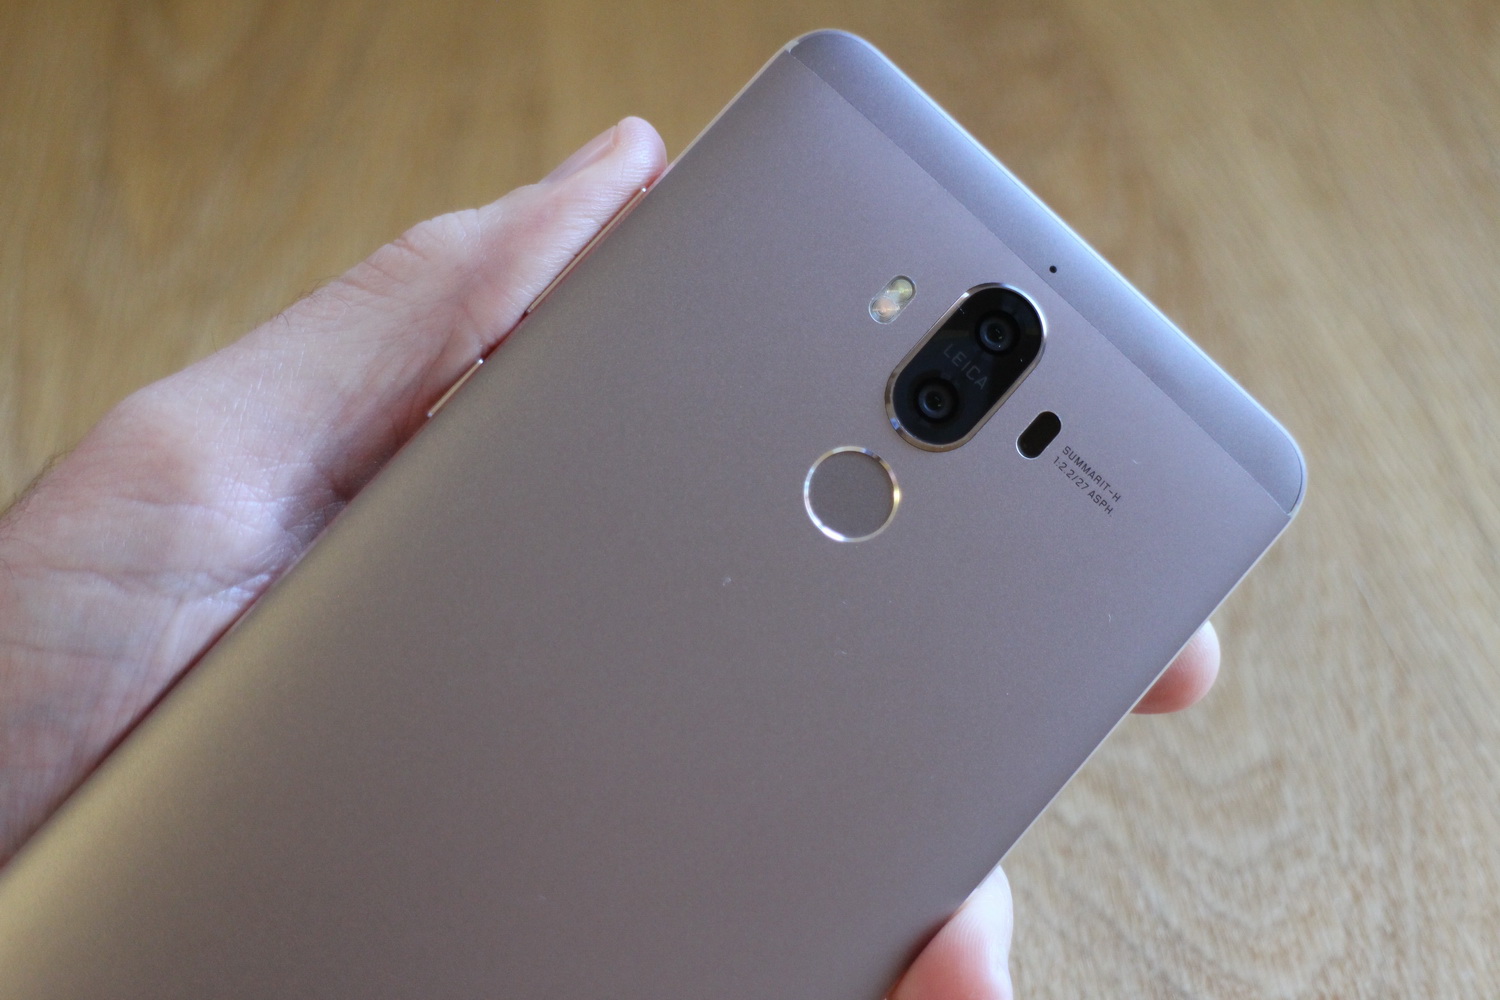 HUAWEI Mate 9 specs, price, release date and everything else you should know